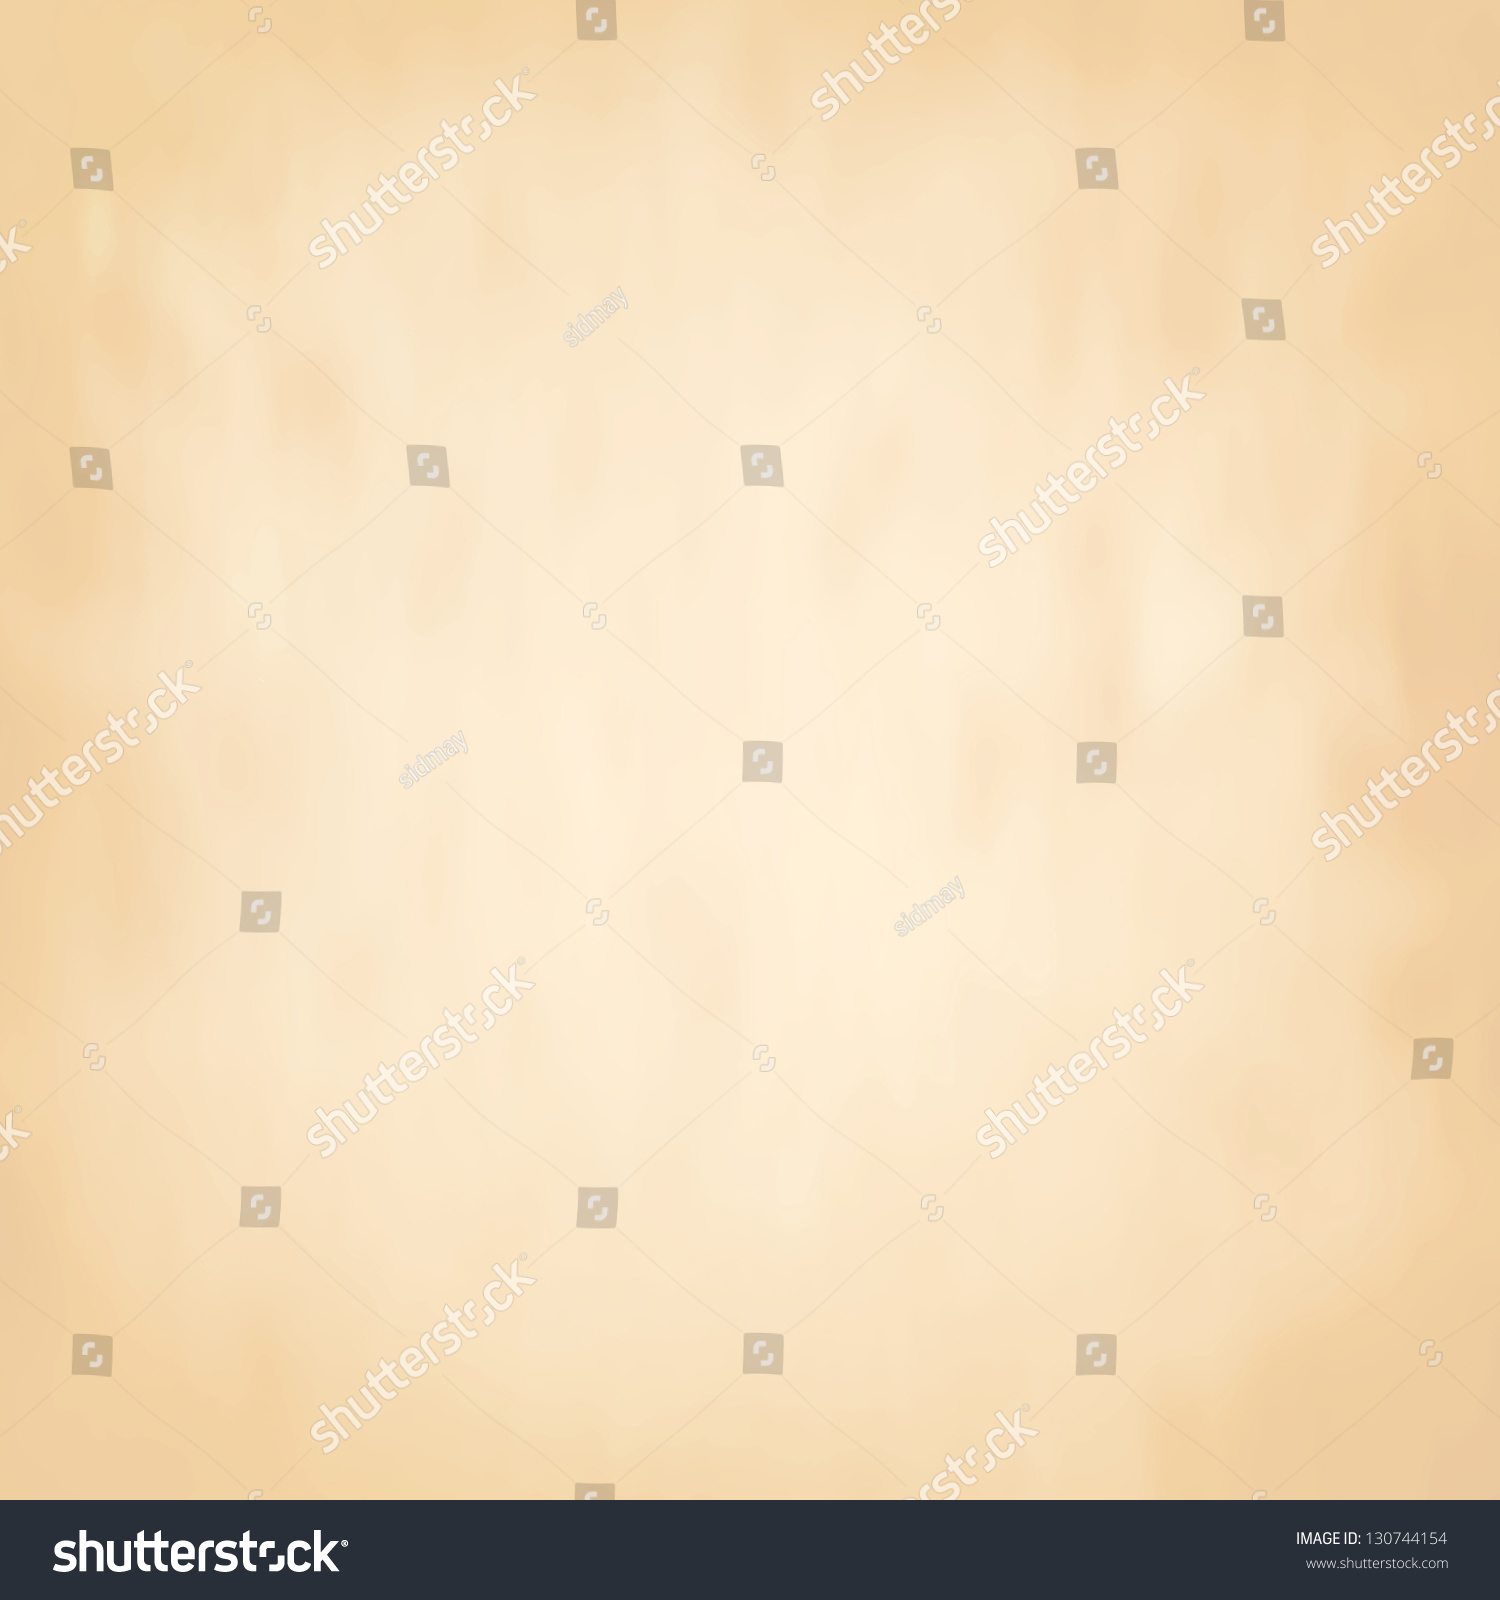 Vector Abstract Brown Background Old Paper Stock Vector 130744154